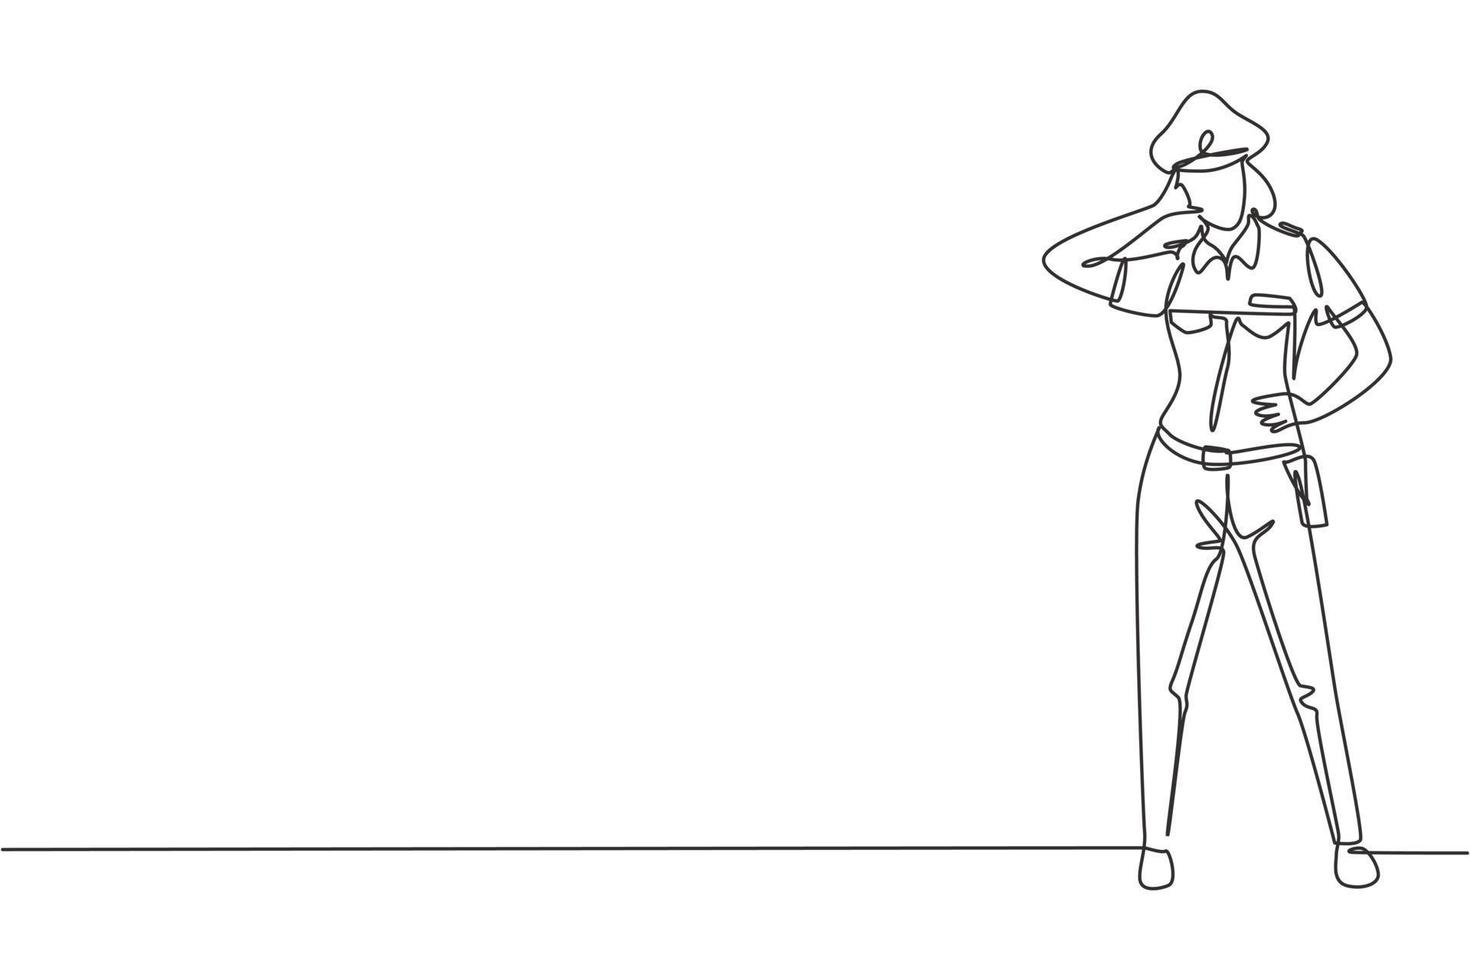 Single one line drawing policewoman standing with call me gesture and full uniform works to control vehicle traffic on highway. Standby patrol. Continuous line draw design graphic vector illustration